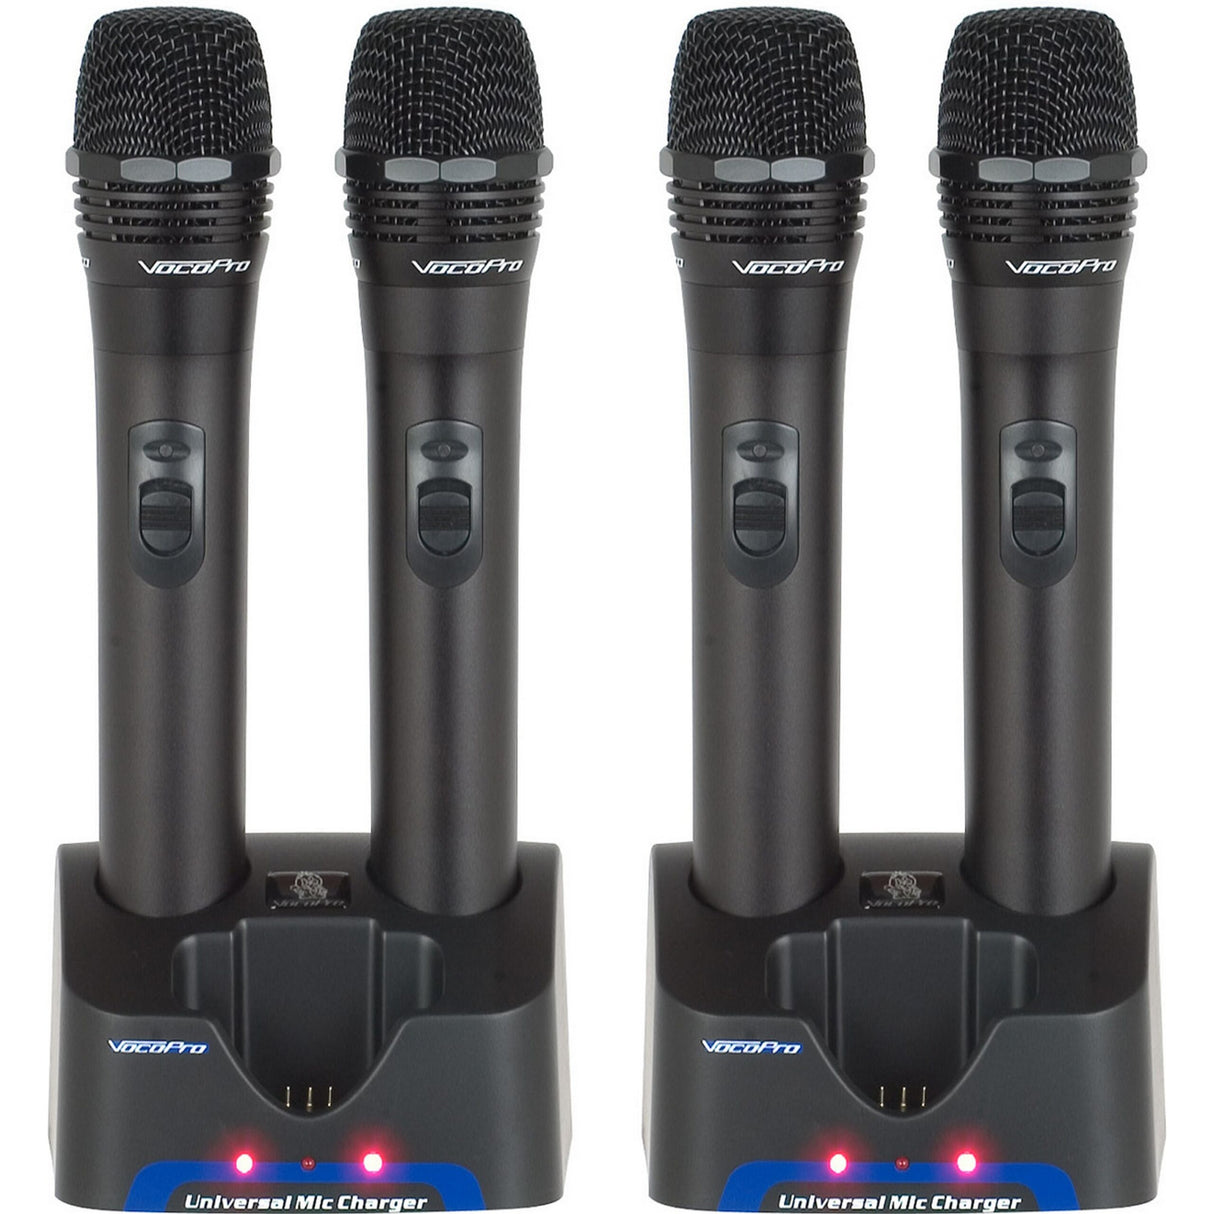 VocoPro UHF-5805 Professional Rechargeable 4-Channel UHF Wireless Microphone System, Frequency 10